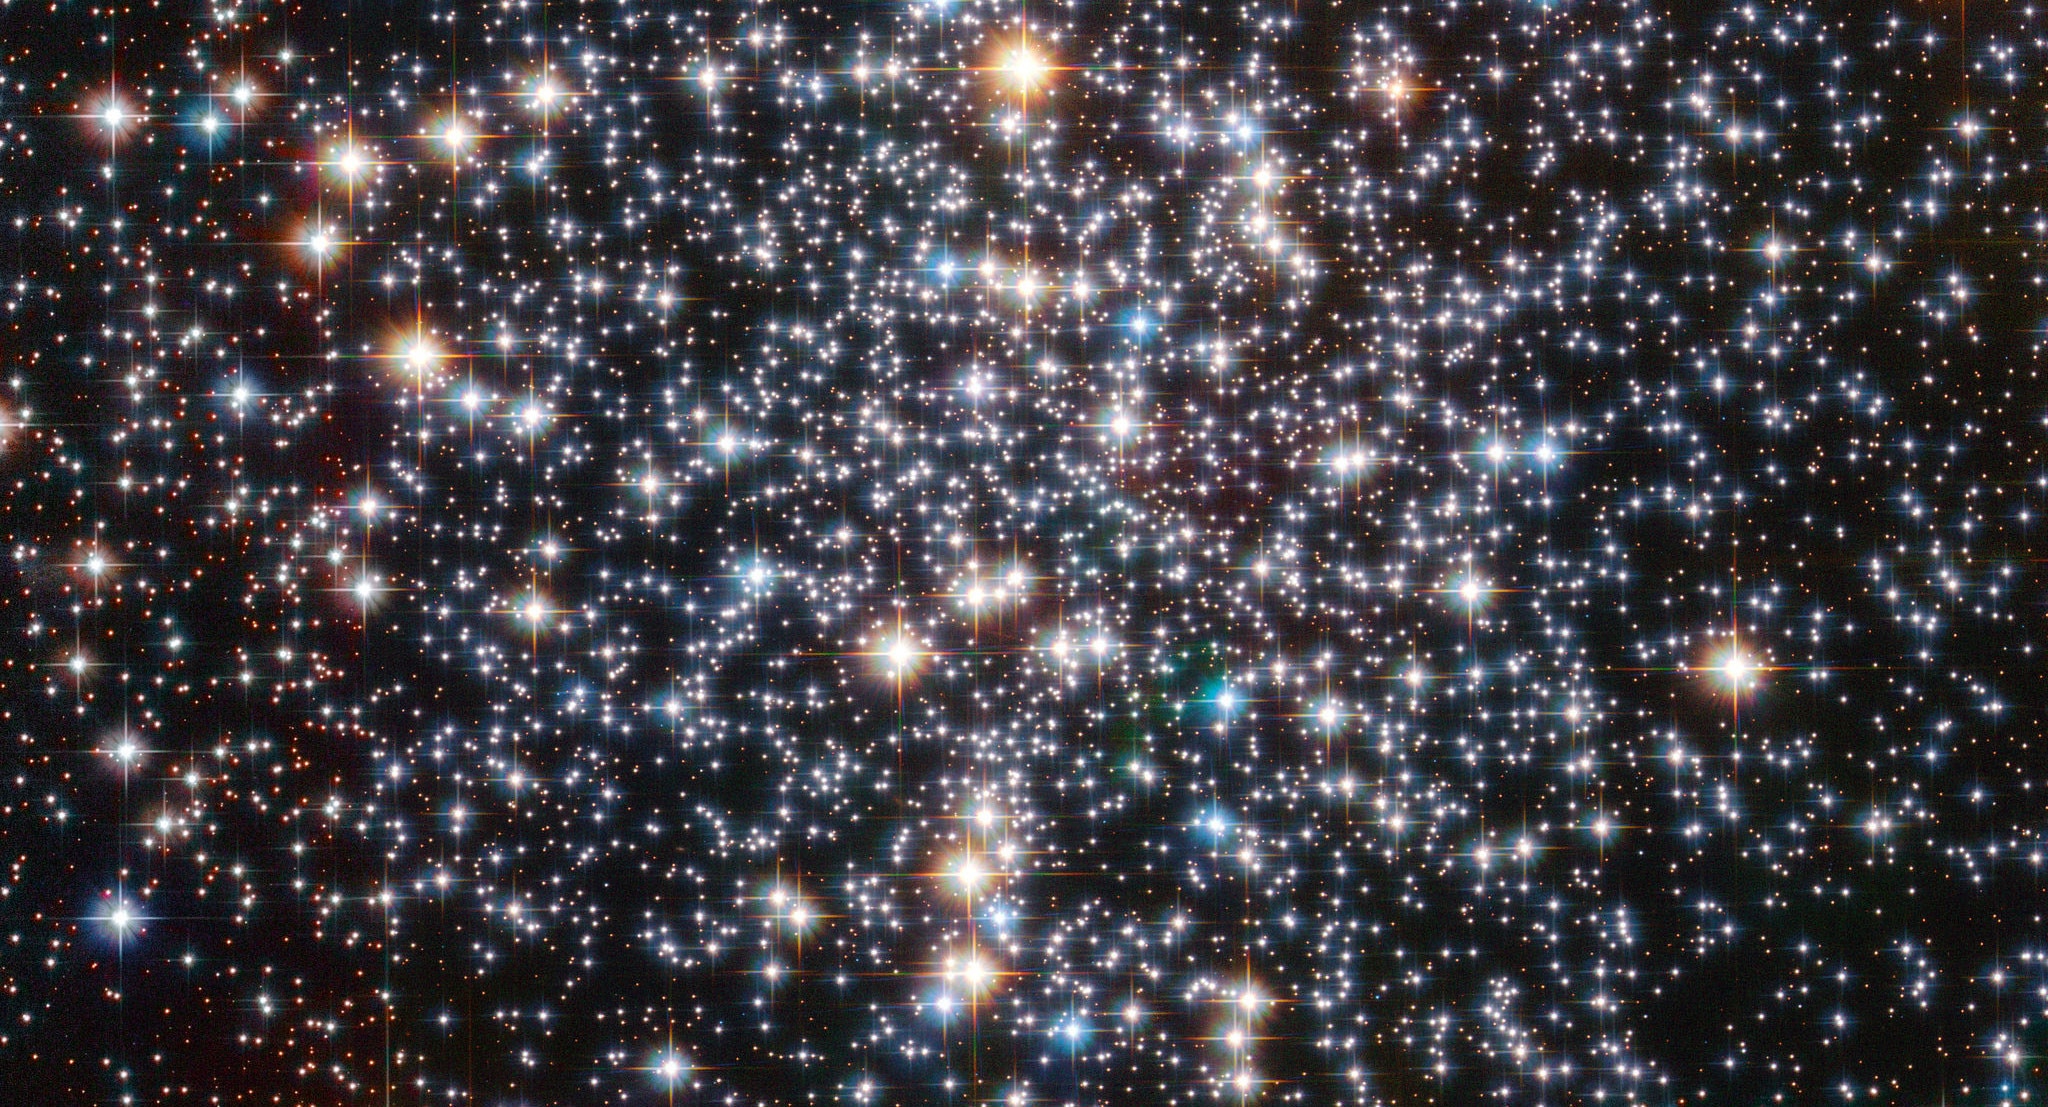 The core of M 4, at 5,000 light years away the closest globular cluster to Earth, making it a prime target for Hubble Space Telescope. Credit: ESA/Hubble & NASA